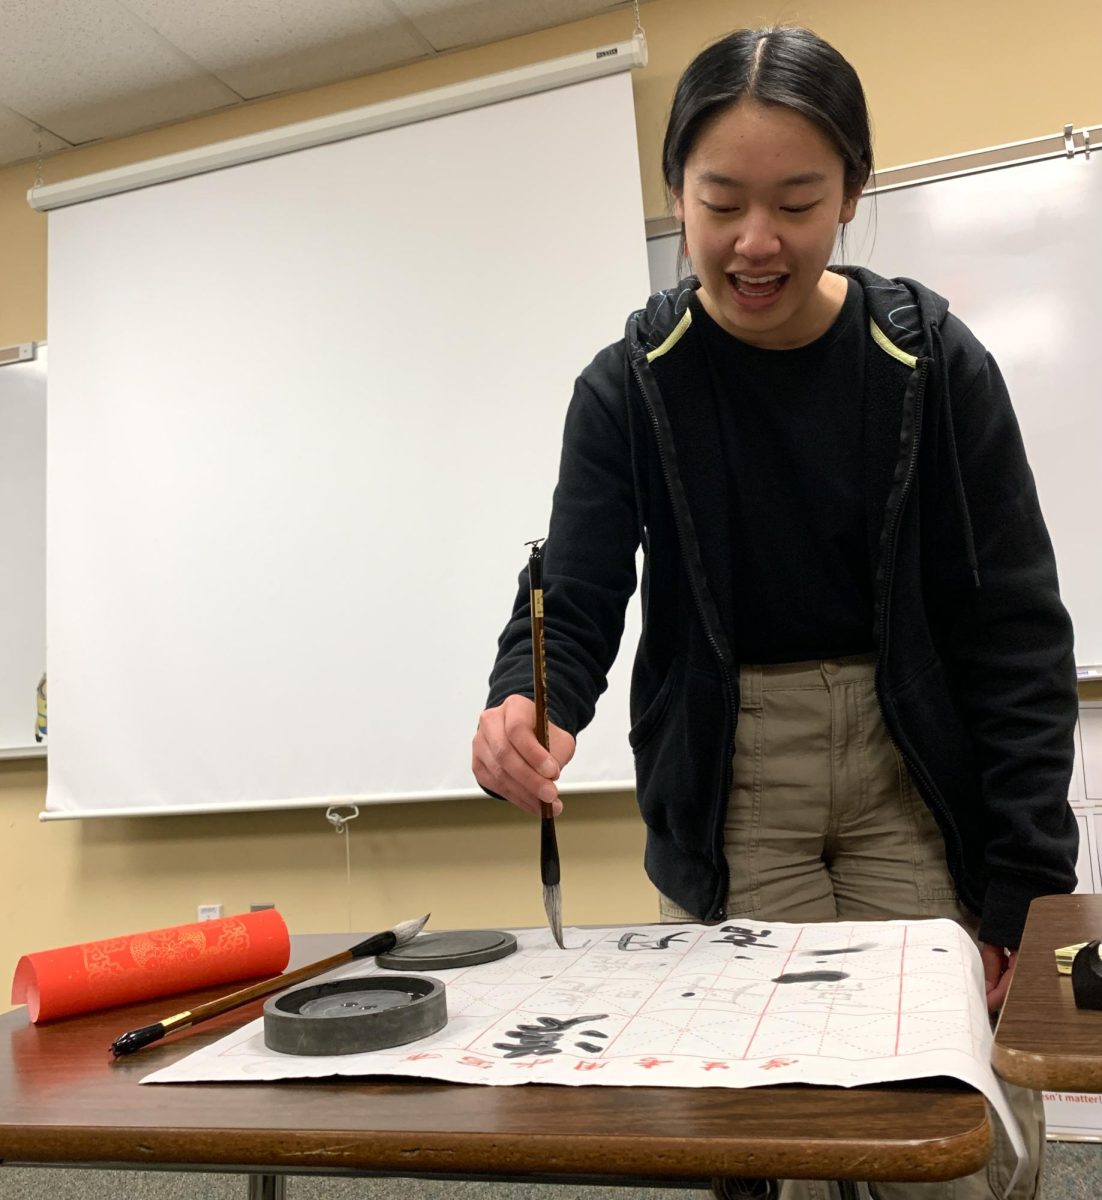 Chinese National Honor Society (CNHS) Co-President Annie Gao ‘24 uses a paintbrush and colored water from a calligraphy kit to paint Chinese characters onto a sheet during a CNHS activity after school Nov. 27. Each month, CNHS hosts a meeting that features a lesson on the language, culture and more, followed by an activity relating to that lesson. “I think [calligraphy] is a really cool art form, like especially in more traditional Chinese art you see a lot of calligraphy, so it’s just kinda cool to connect back with our cultural roots,” Gao said.